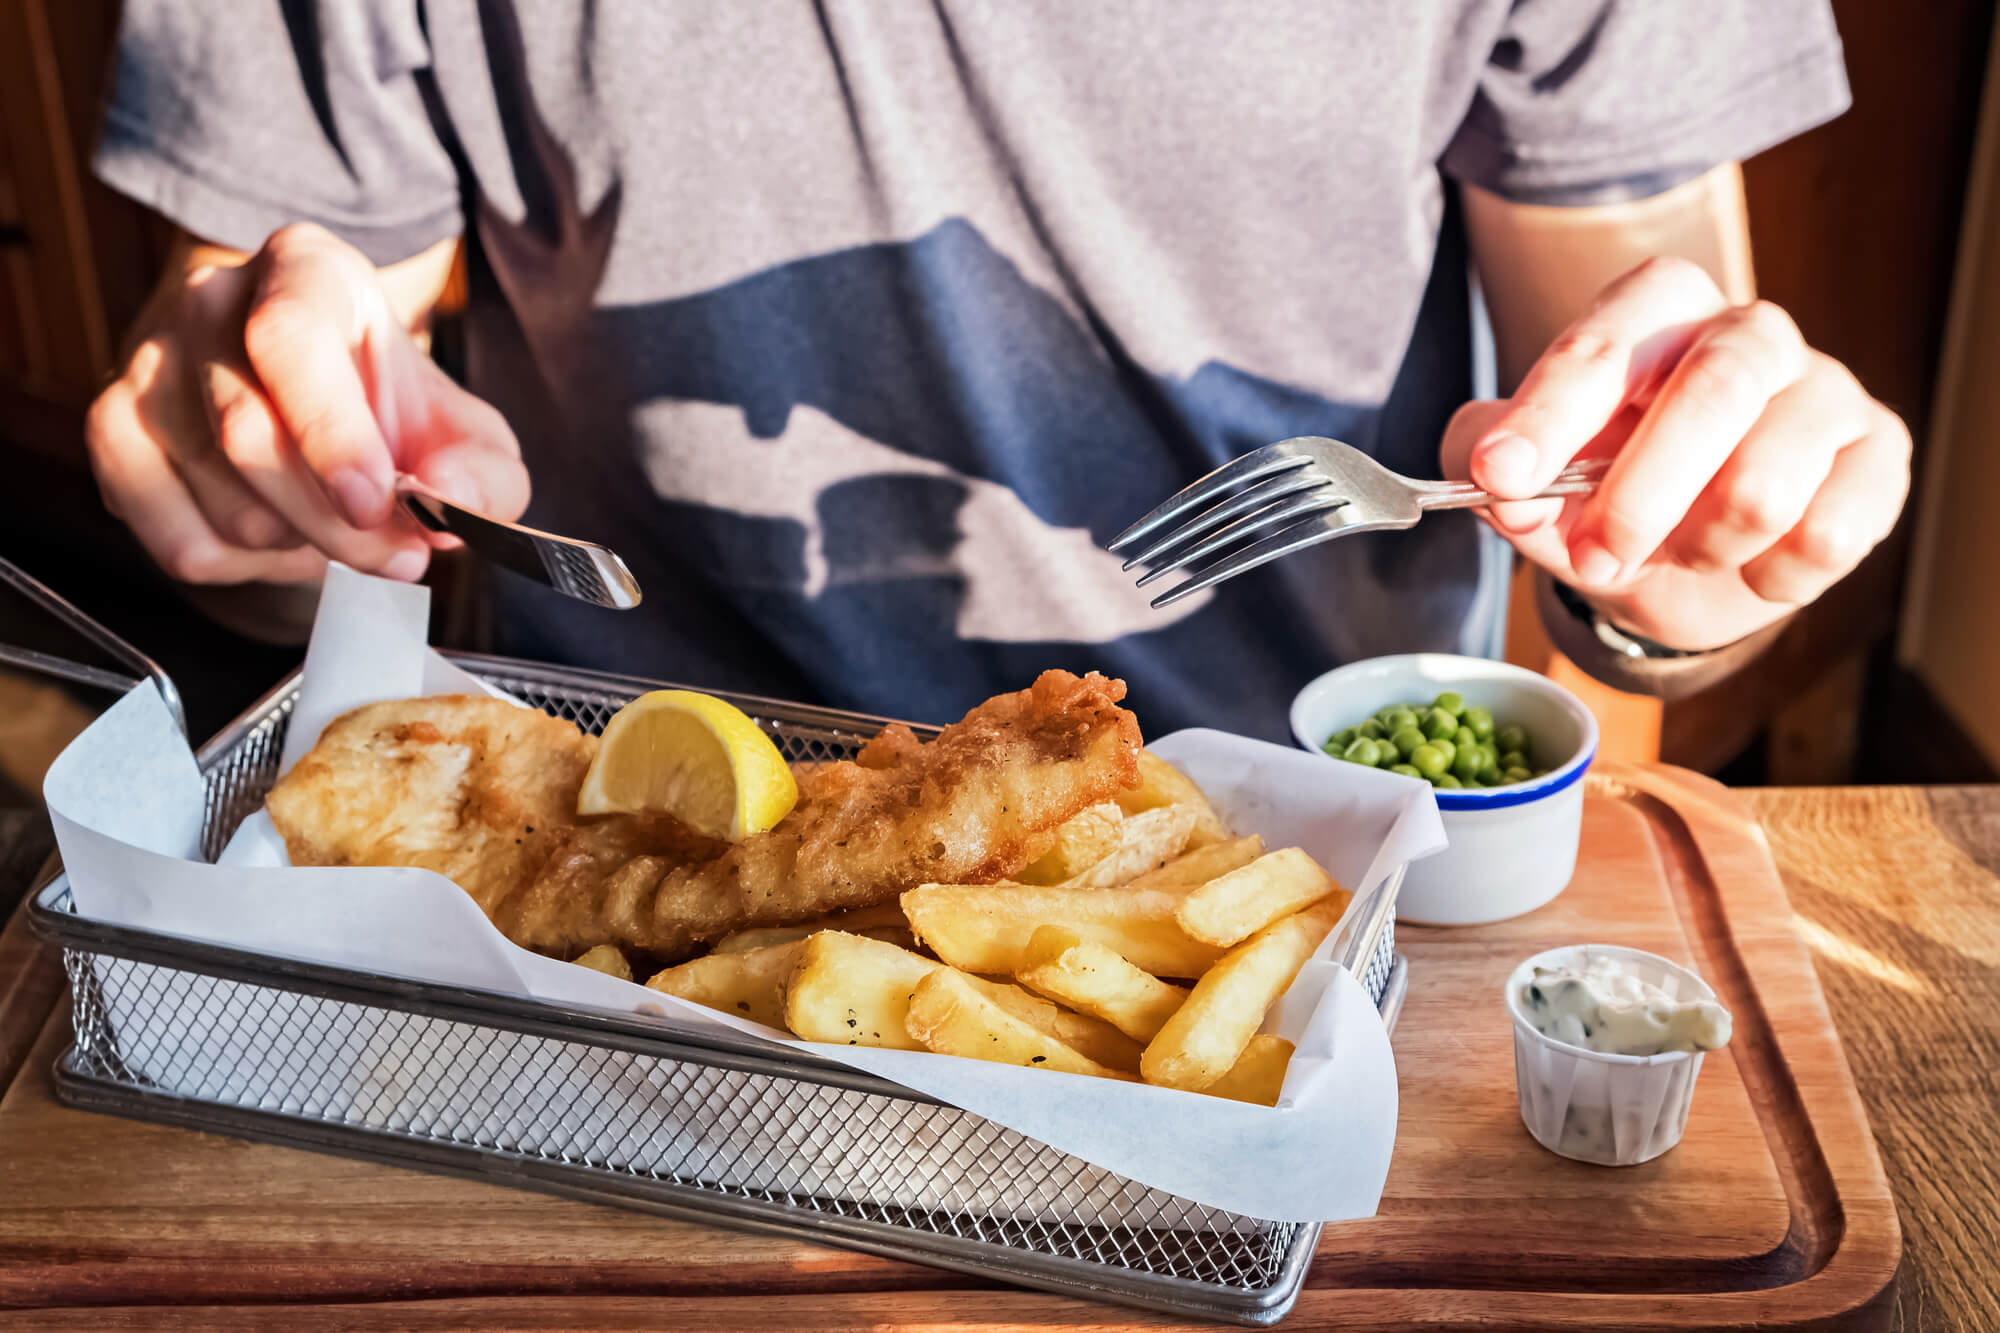 Meal of fish and chips